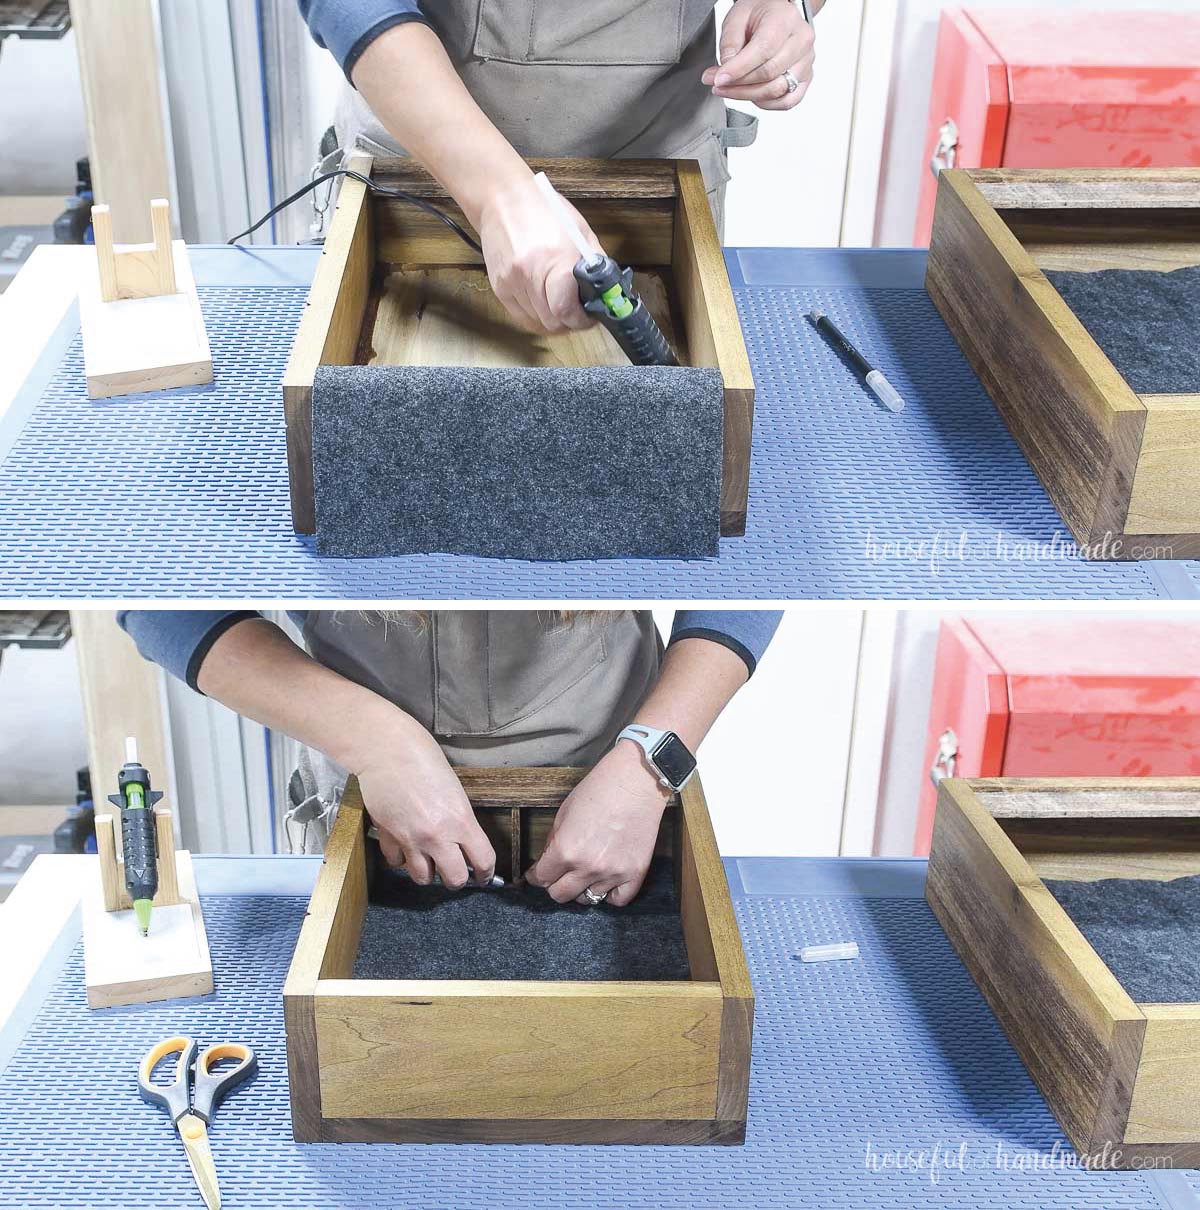 Glueing gray felt into the back of the jewelry box.